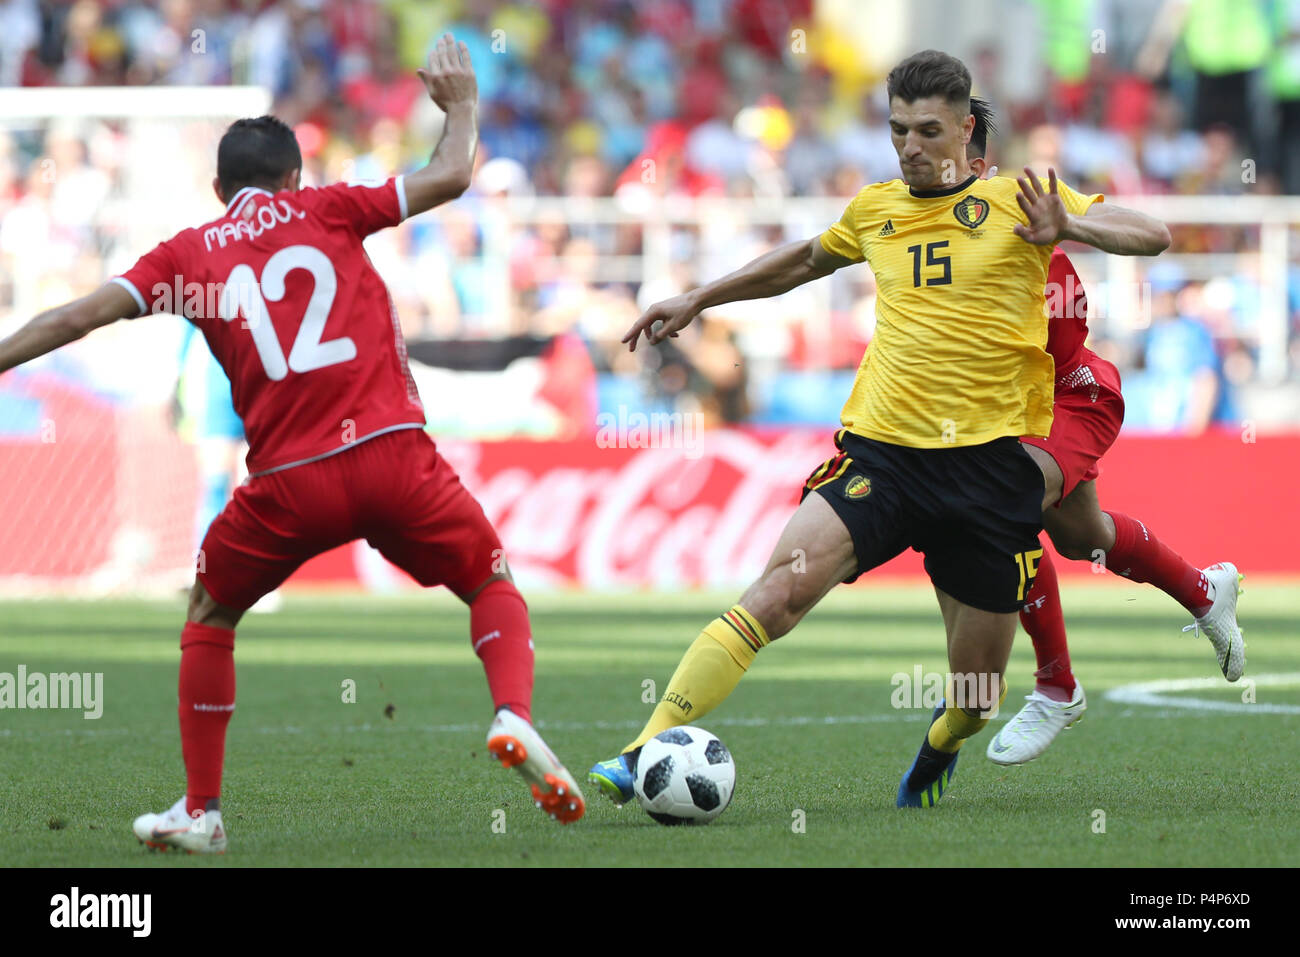 Moscow, Russia. 23rd June, 2018. Thomas Meunier (R) of Belgium competes during the 2018 FIFA World Cup Group G match between Belgium and Tunisia in Moscow, Russia, June 23, 2018. Credit: Xu Zijian/Xinhua/Alamy Live News Stock Photo